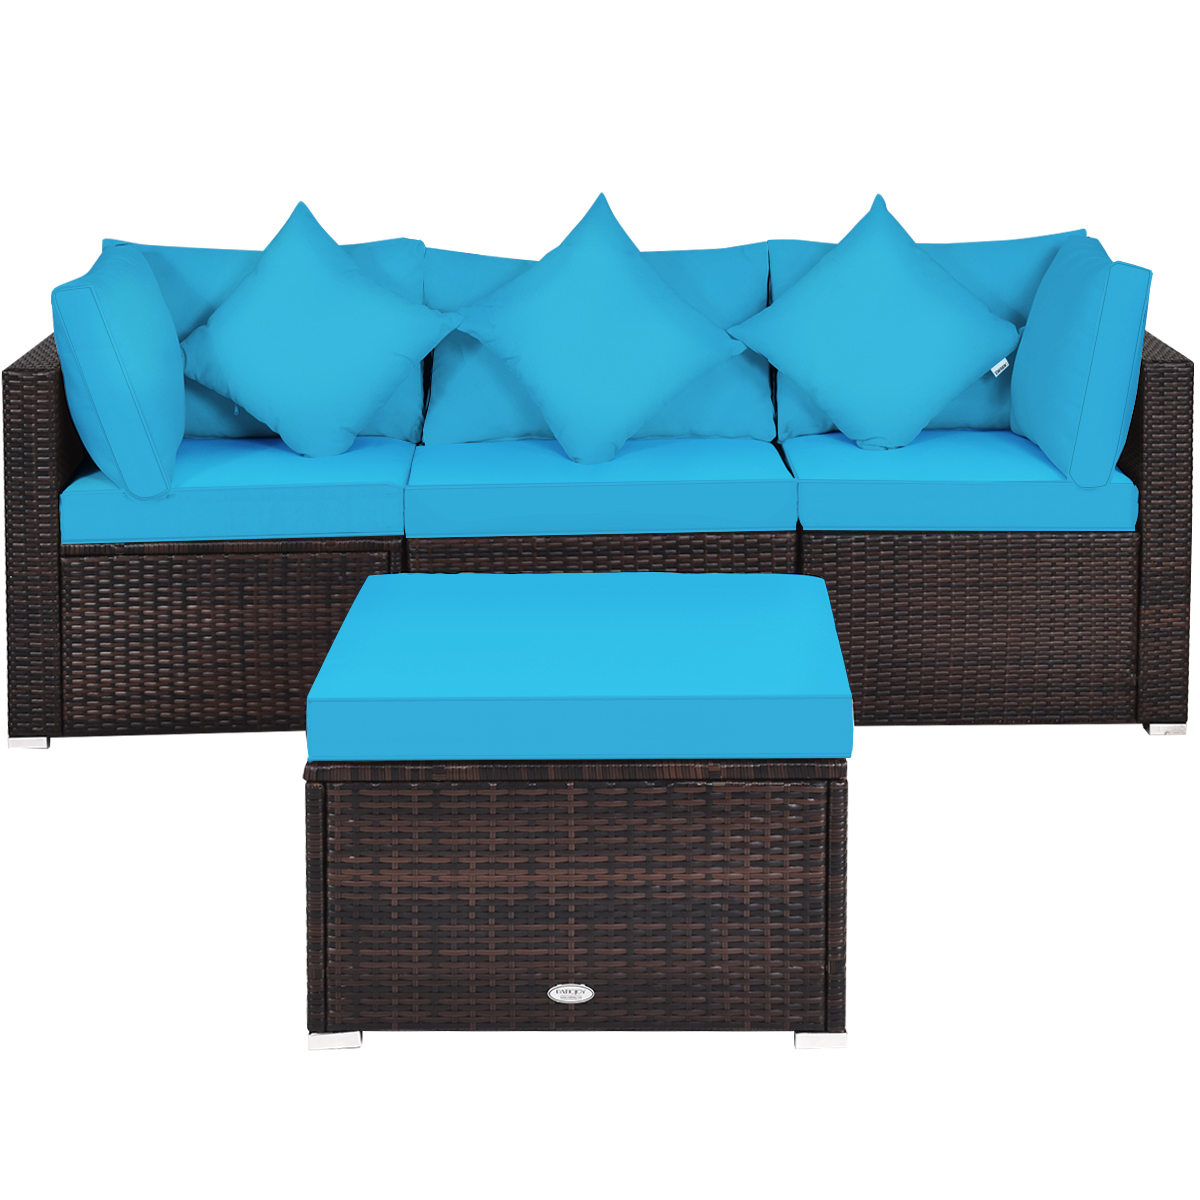 Turquoise_4_PCS_Patio_Rattan_Conversation_Set_with_Coffee_Table-8.jpg